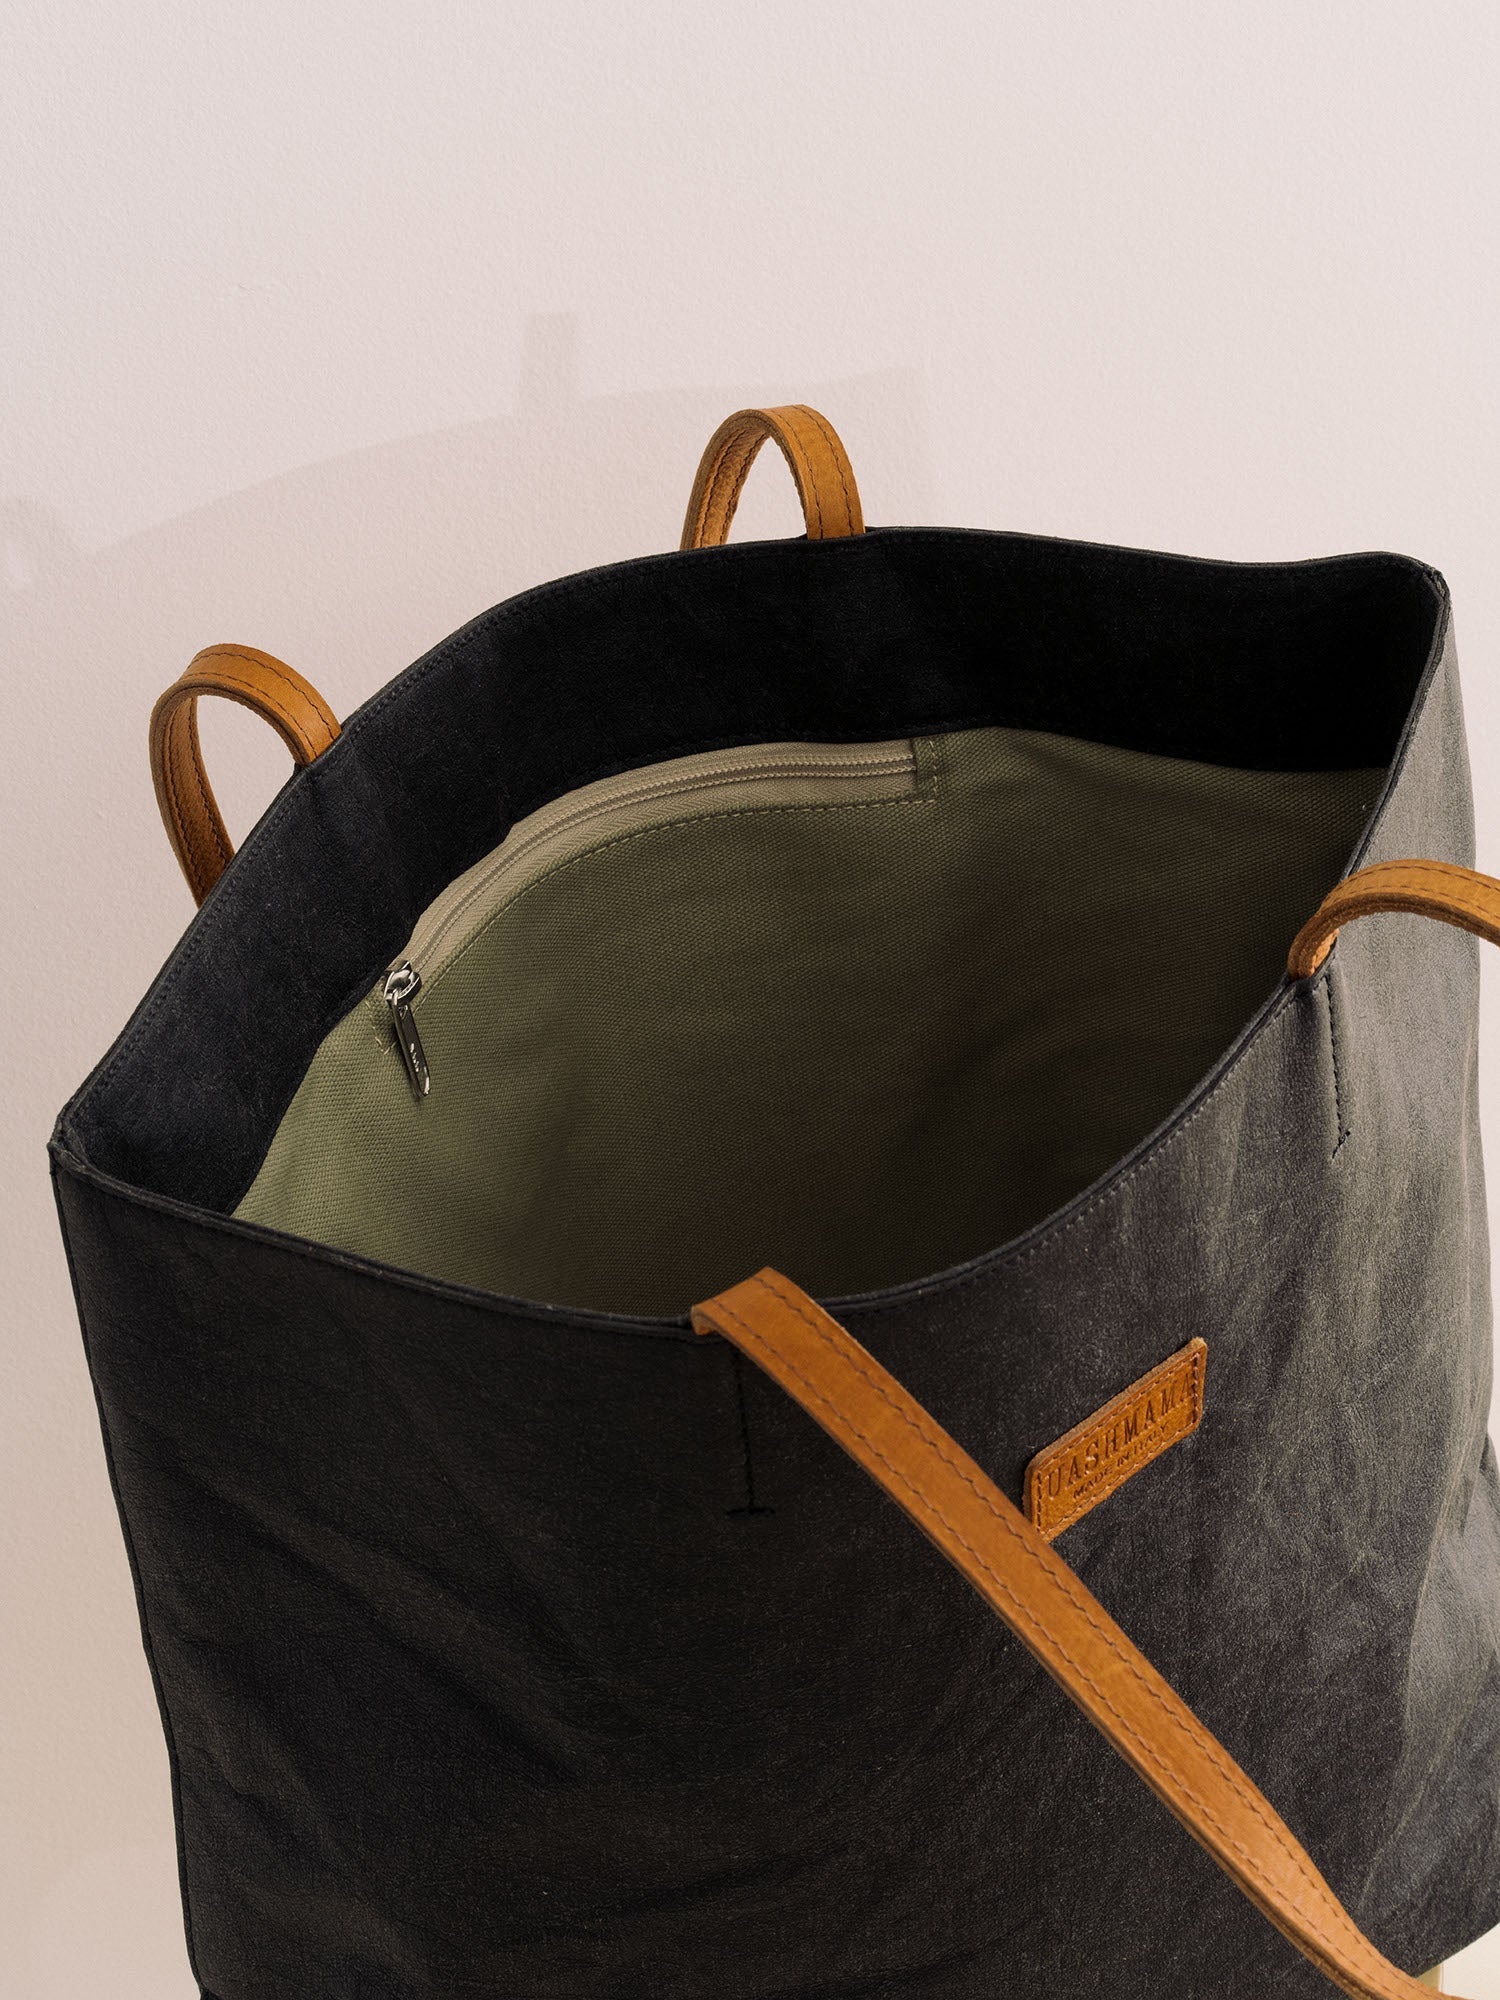 A black washable paper tote bag with tan handles and a leather UASHMAMA logo label is shown open. The image shows an organic cotton lining and an internal zipped pocket.